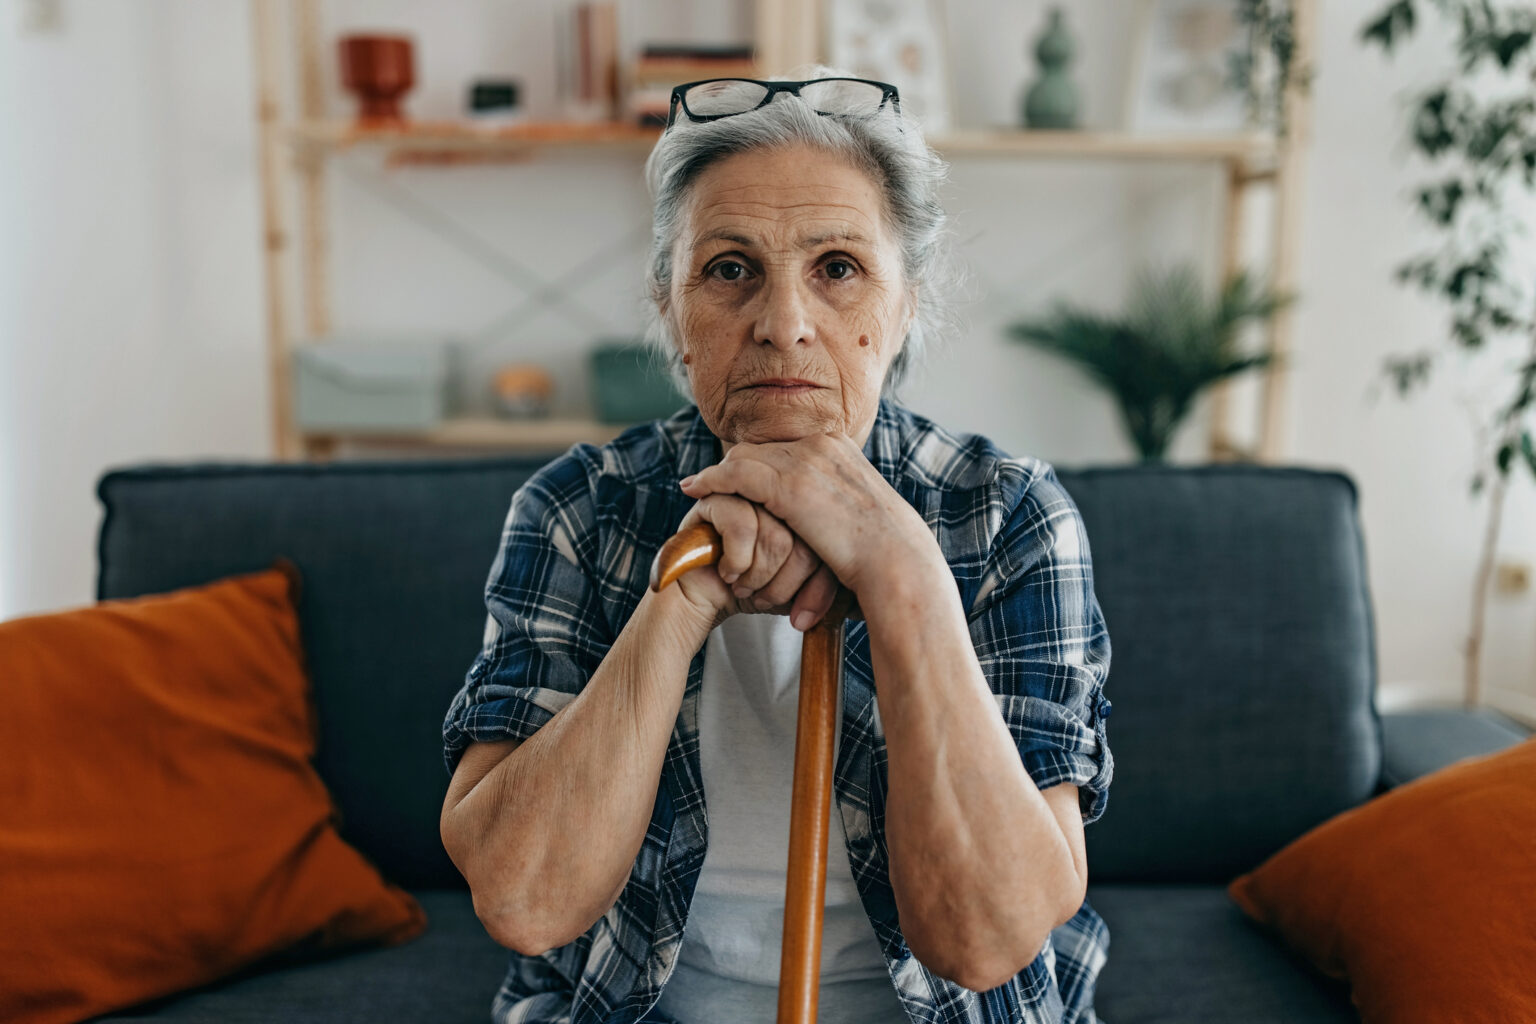 Tired older woman sitting on sofa, holding a walking stick